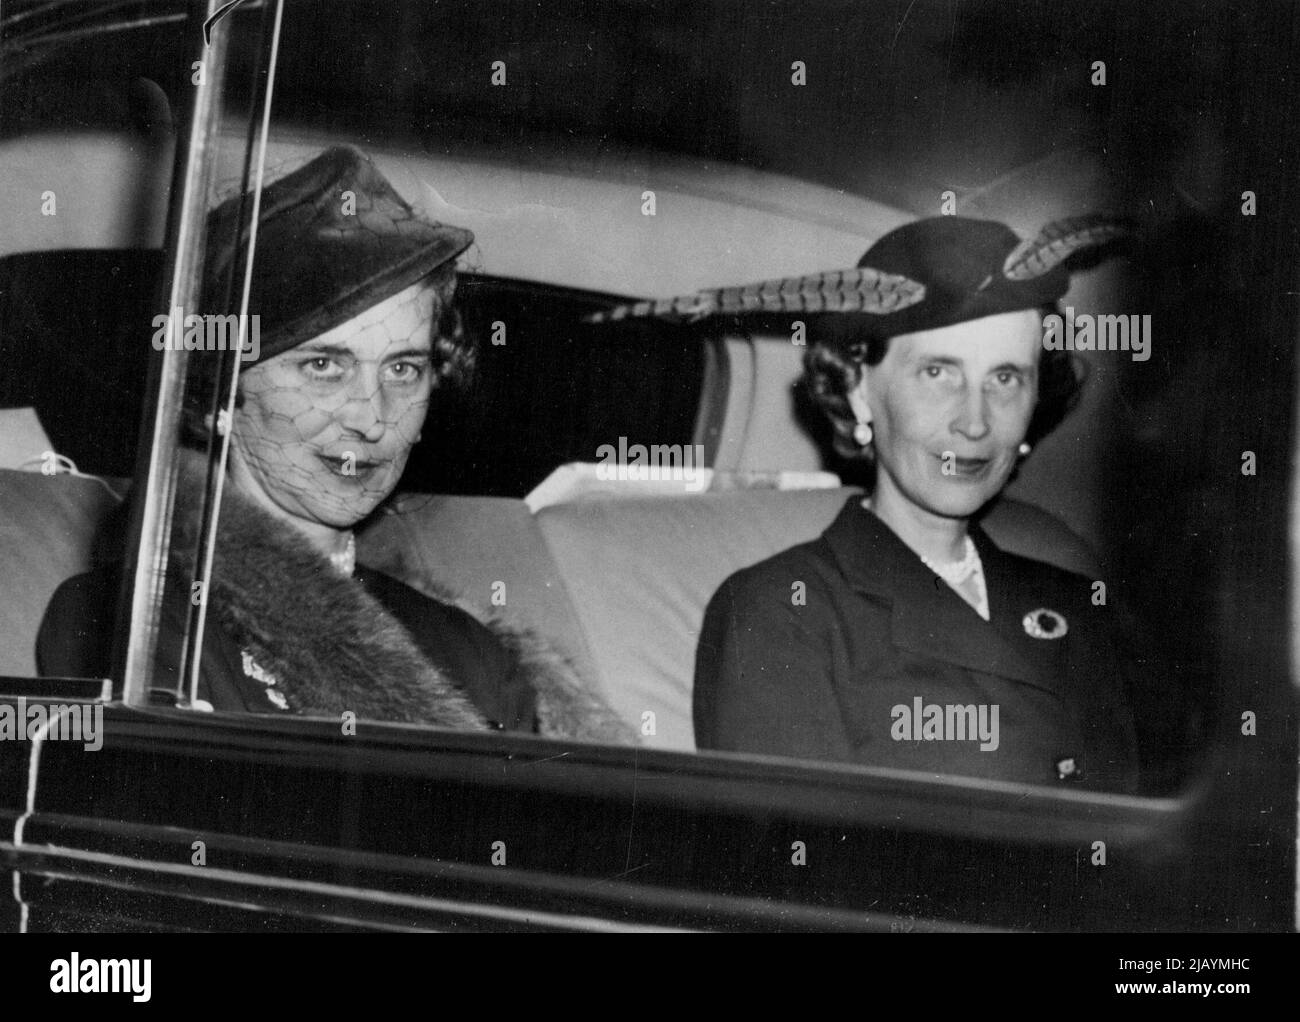 Duchess of Kent Visits Clarence House - The Duchess of Kent leaving Clarence House - home of Princess Elizabeth and the Duke of Edinburgh this afternoon. She is accompanied by her sister, (right). September 24, 1951. (Photo by Planet News) Stock Photo